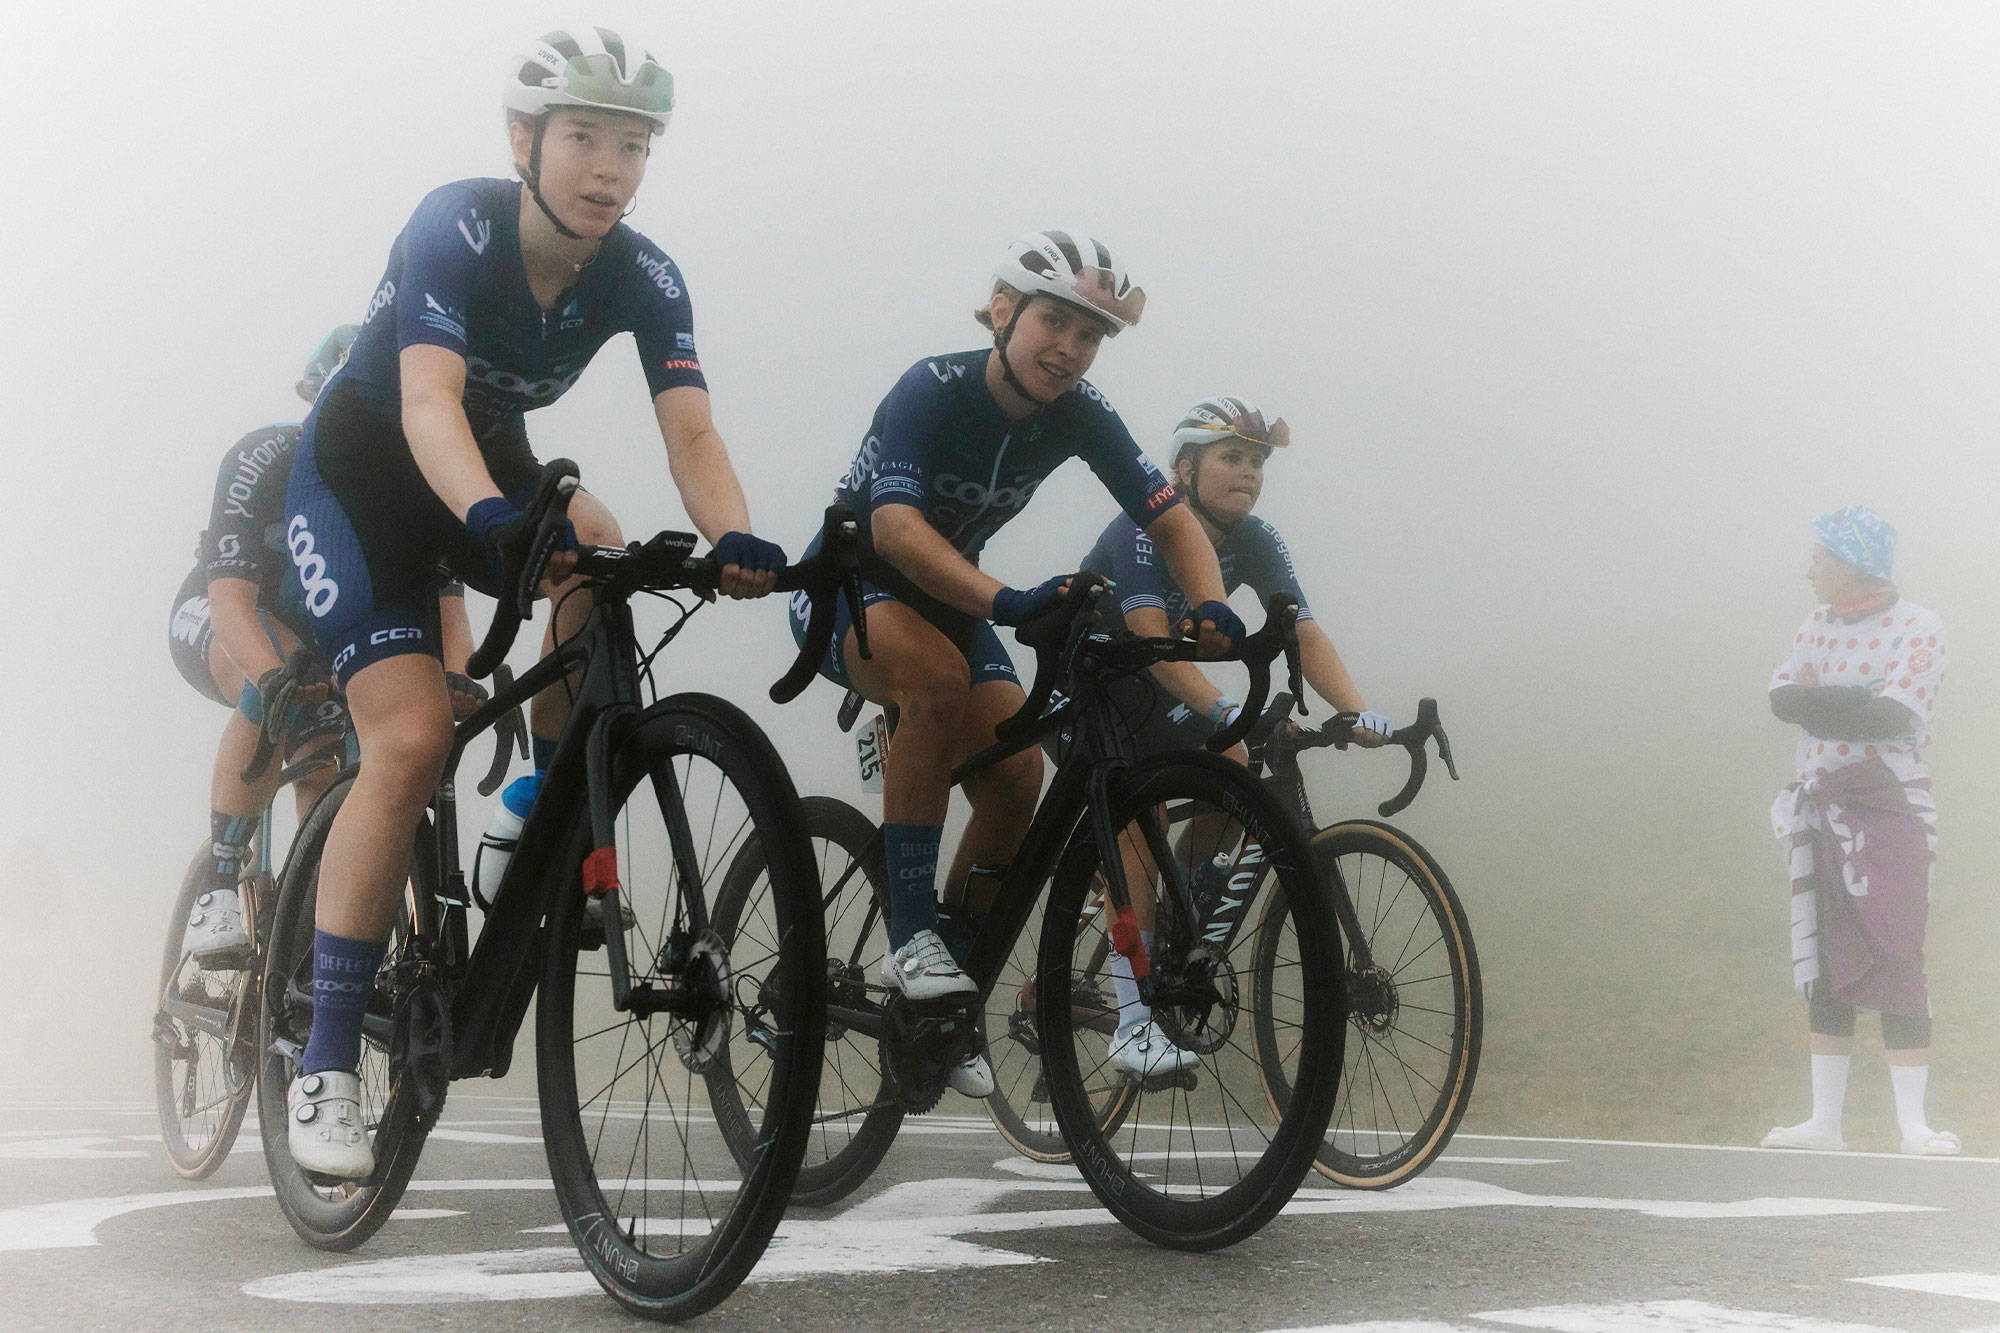 Josie and Tiril riding up the Tourmalet in the fog